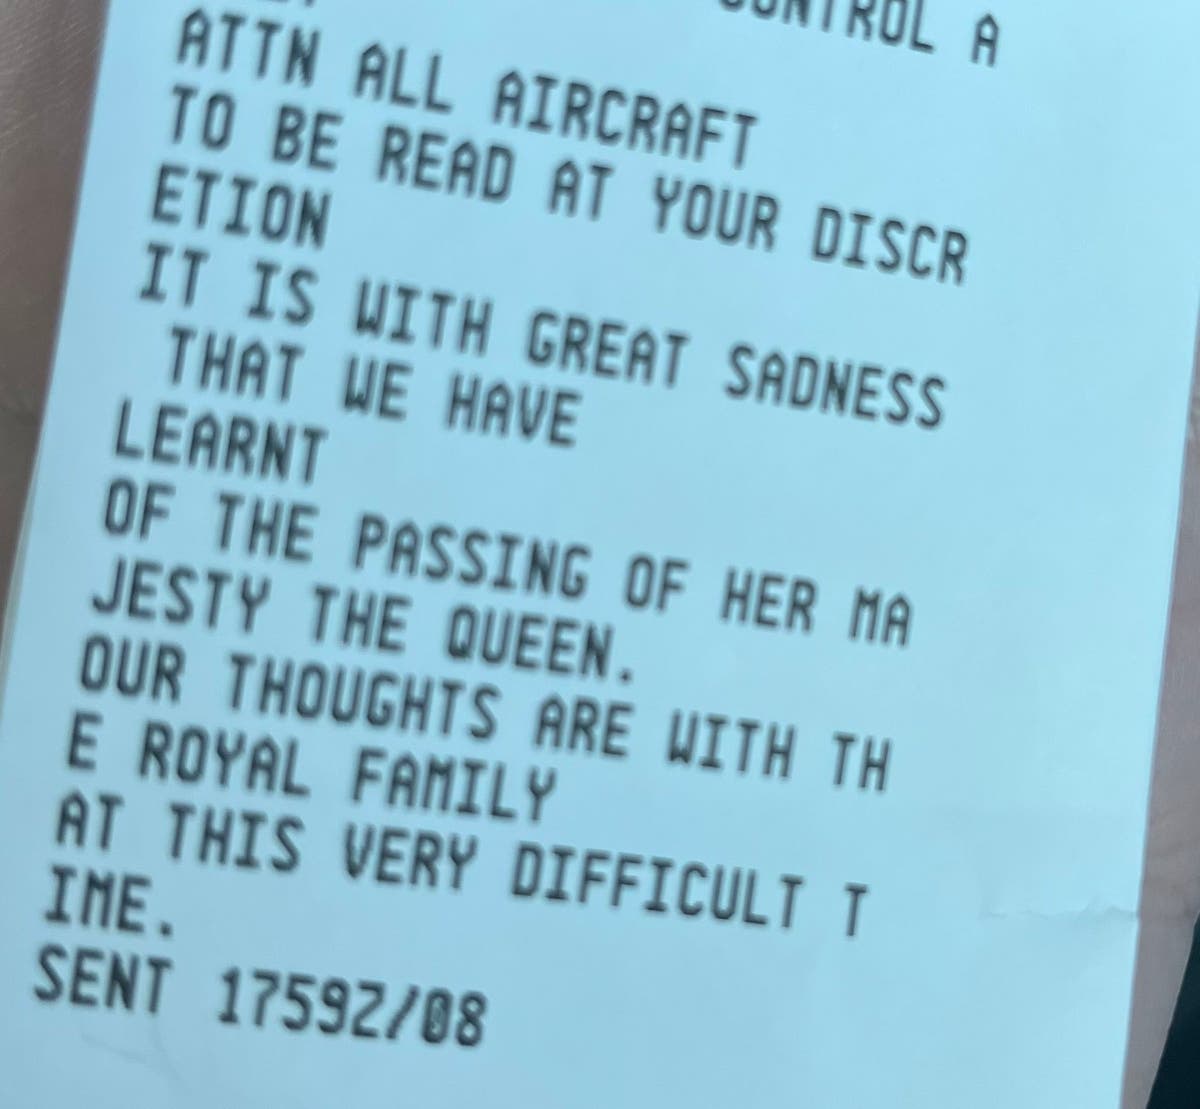 This is how pilots were told mid-flight that the Queen had died